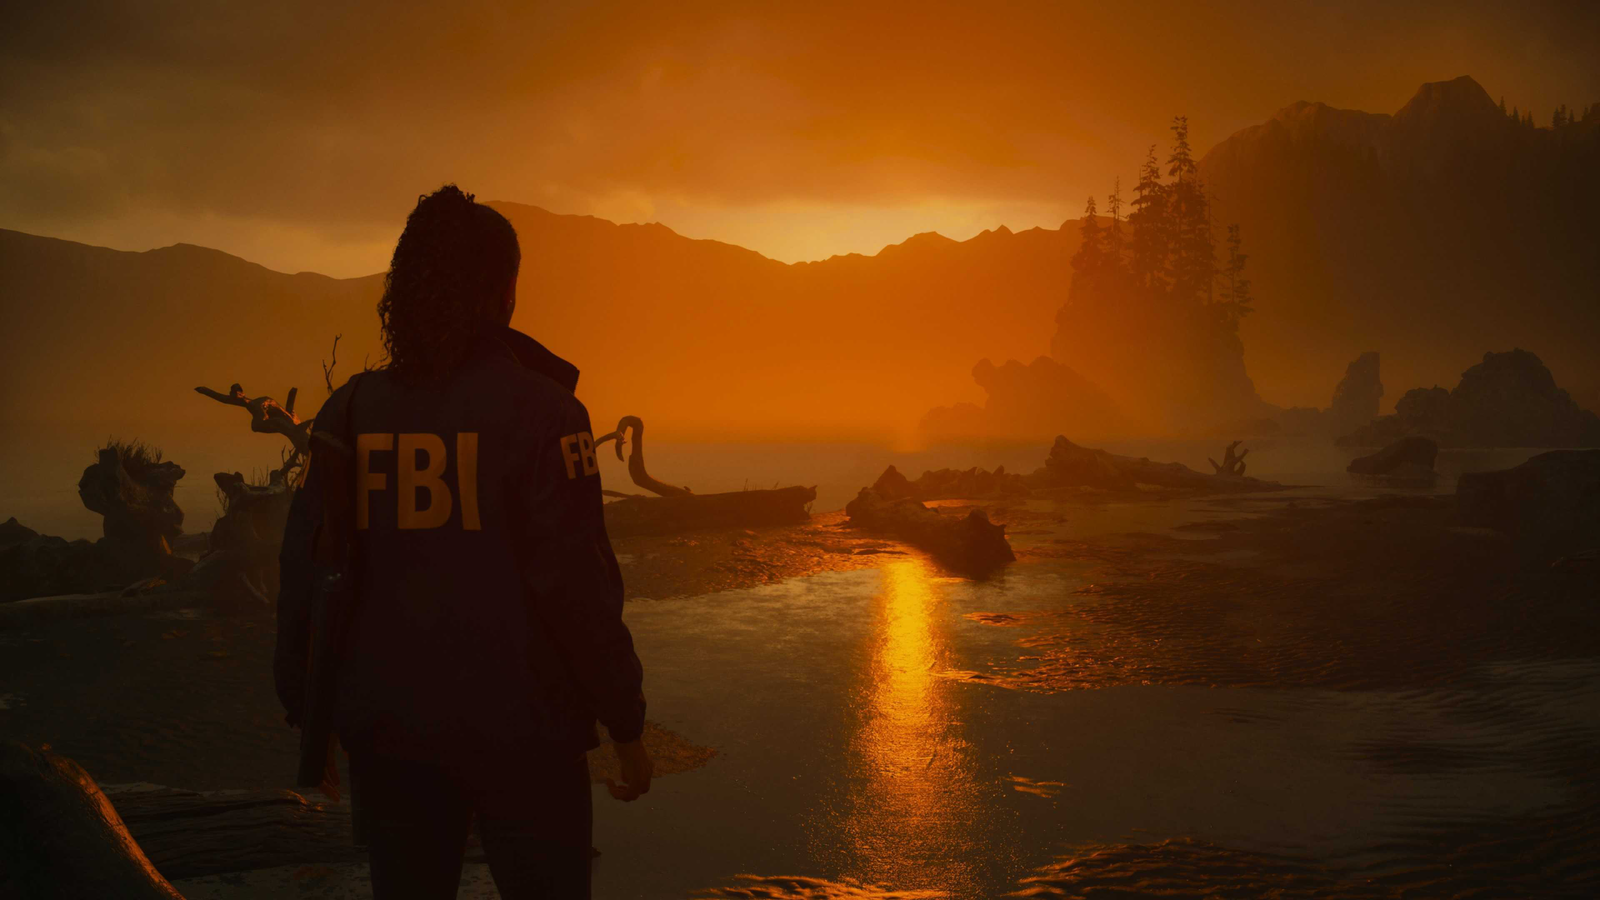 Alan Wake 2 is getting photo mode and New Game+ sometime after launch